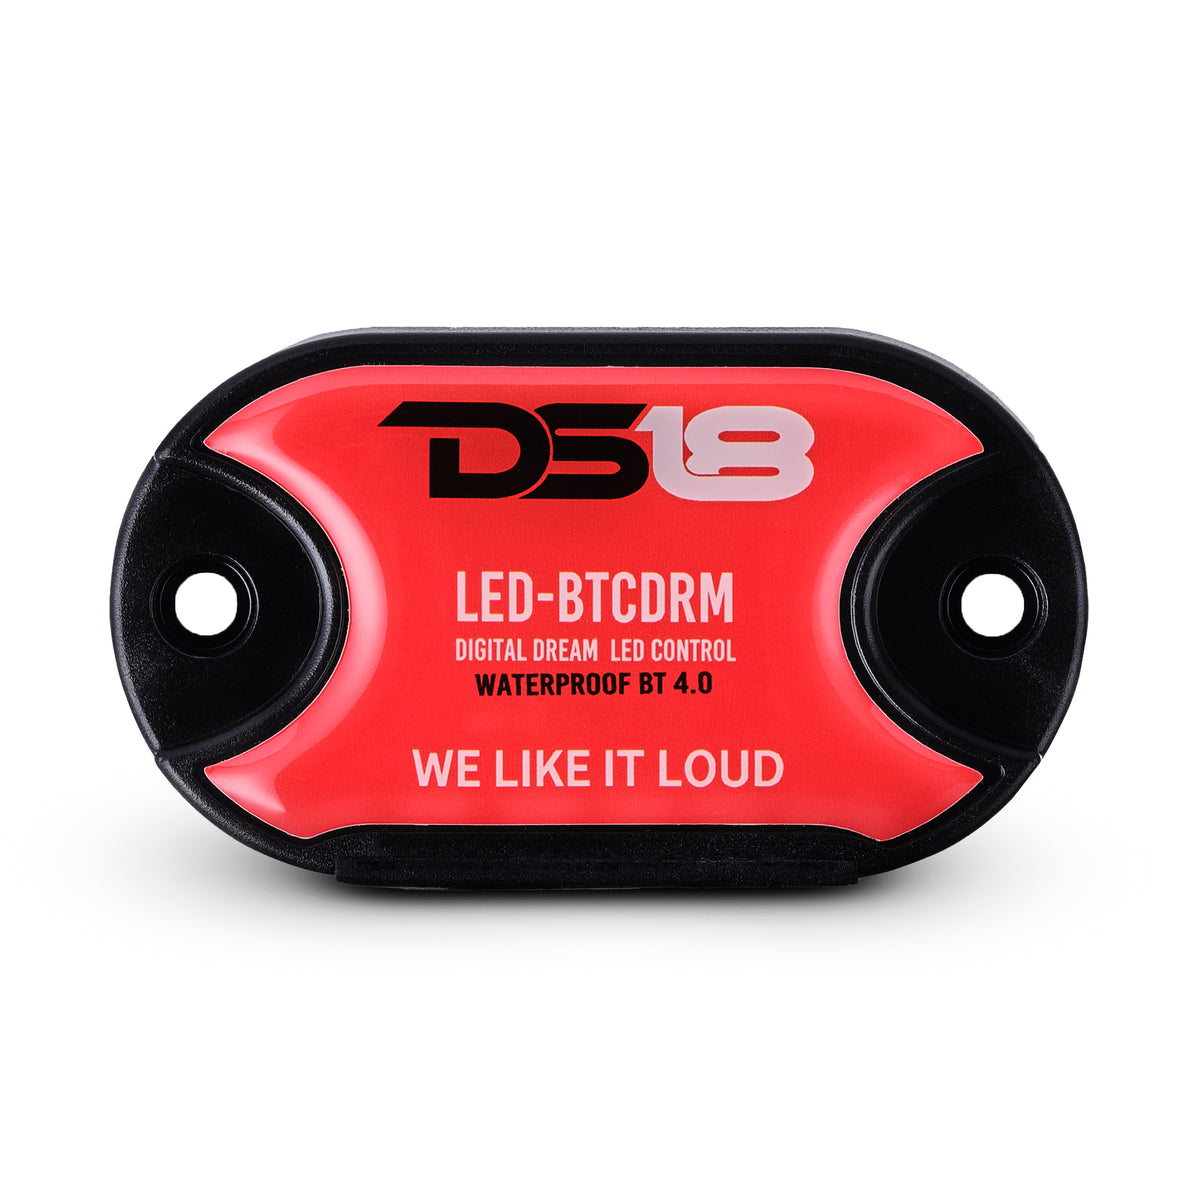 RGB LED Dream Digital Lights Chasing Bluetooth Control (Works with Android and IPhone)